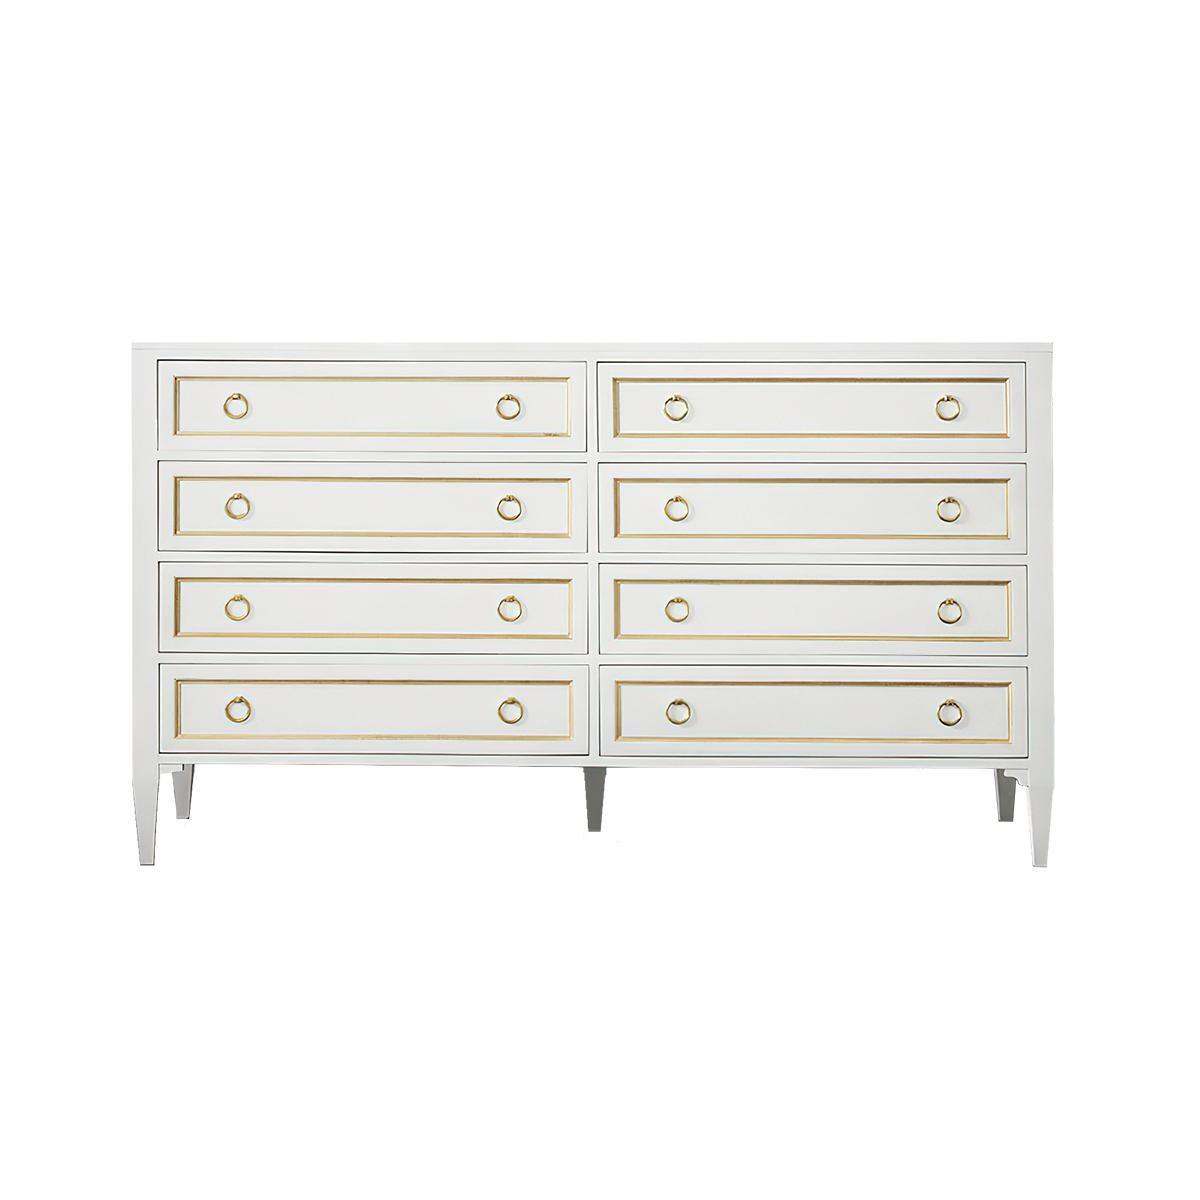 Classic White Painted Dresser with an antique white lacquered finish. This eight-drawer dresser complements both traditional and modern decor. 
With recessed panels having gilded trim, brass ring pulls, and raised on square tapered